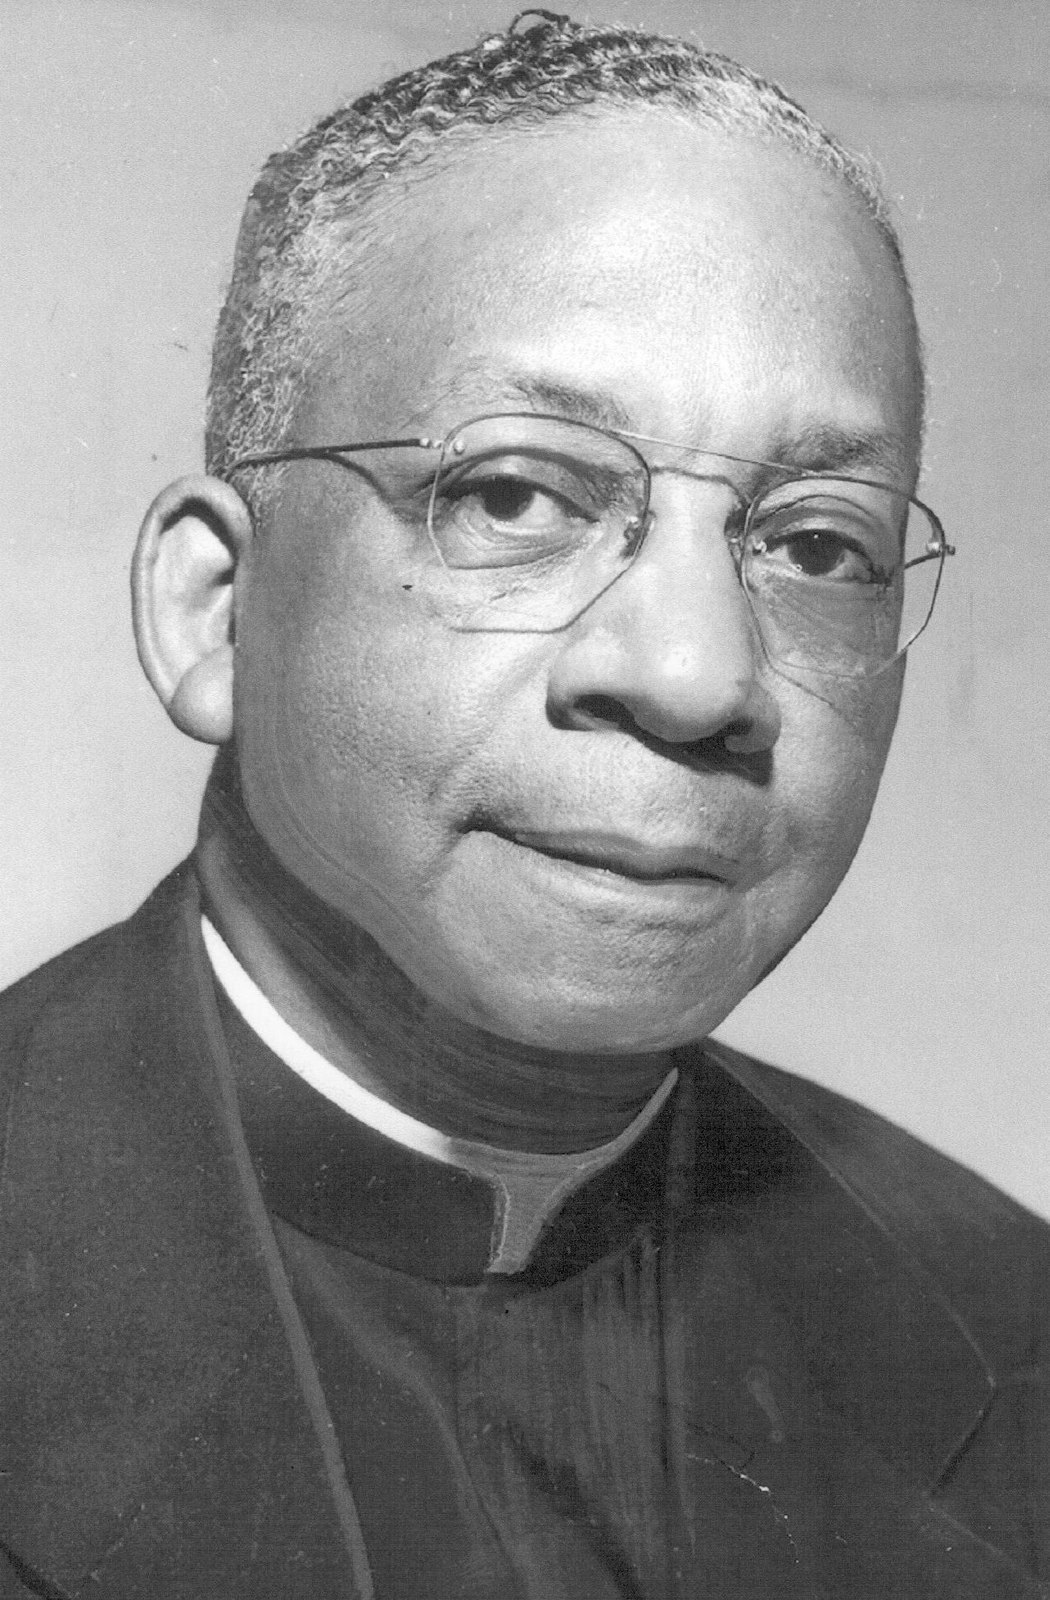 Fr. DuKette is pictured in this undated photo. As pastor of Christ the King Parish in Flint, Fr. DuKette ministered to factory workers who had moved north seeking jobs in the city's automotive plants. (Photo courtesy of Archdiocese of Detroit Archives)